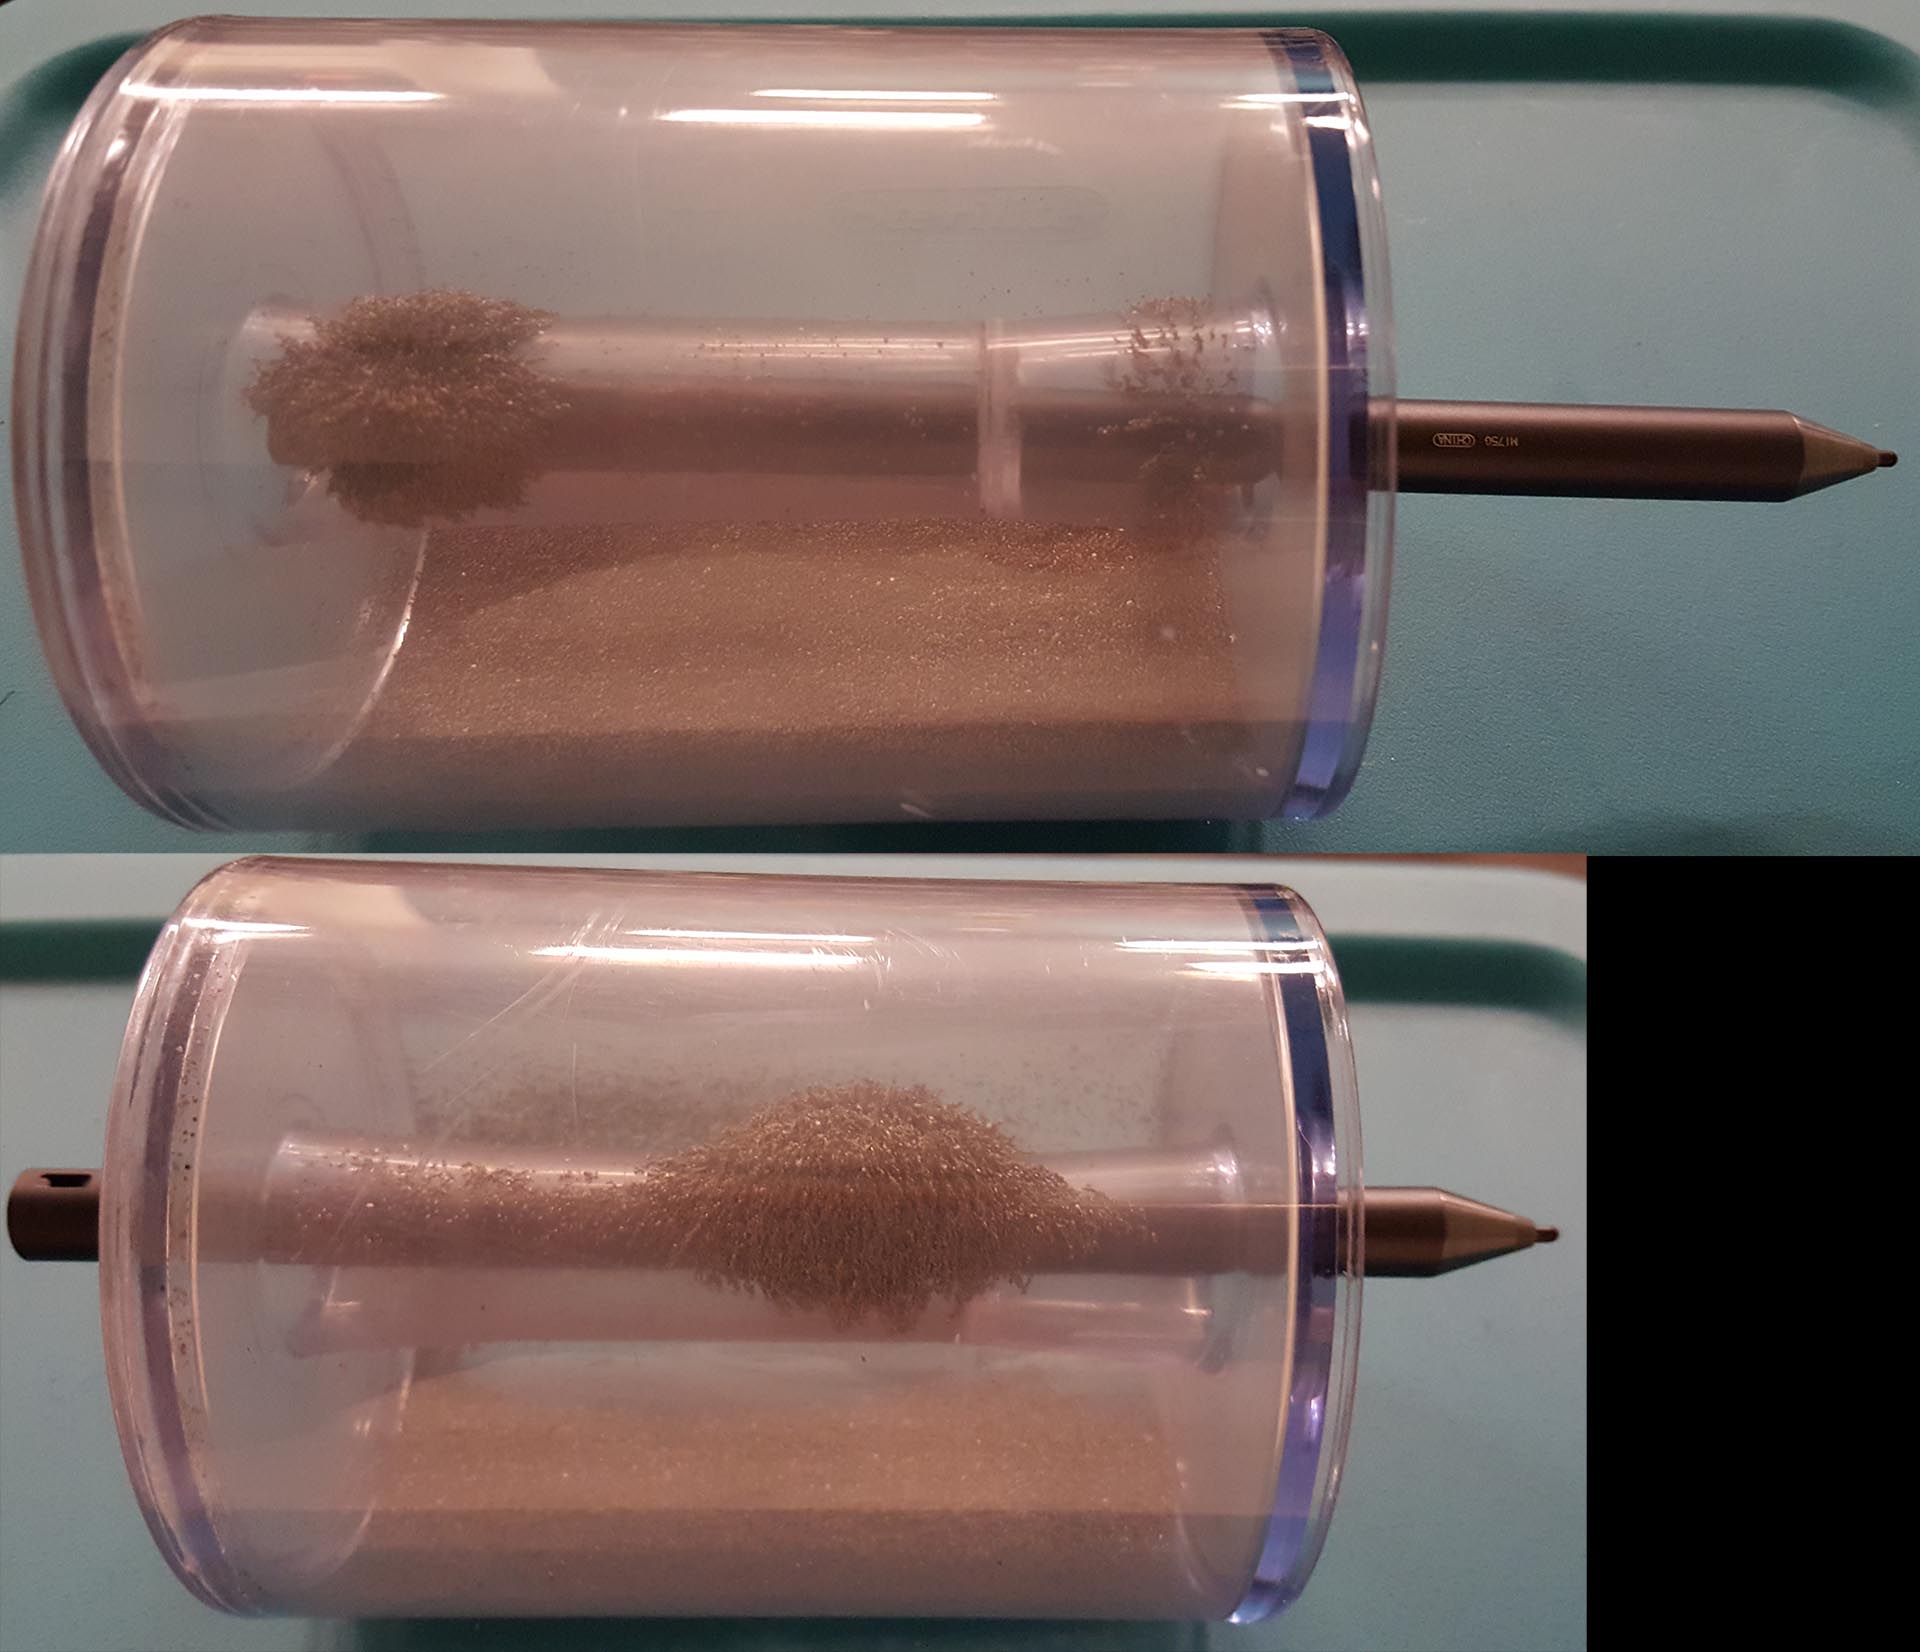 dell pen iron powder chamber pics where magnetic fields are